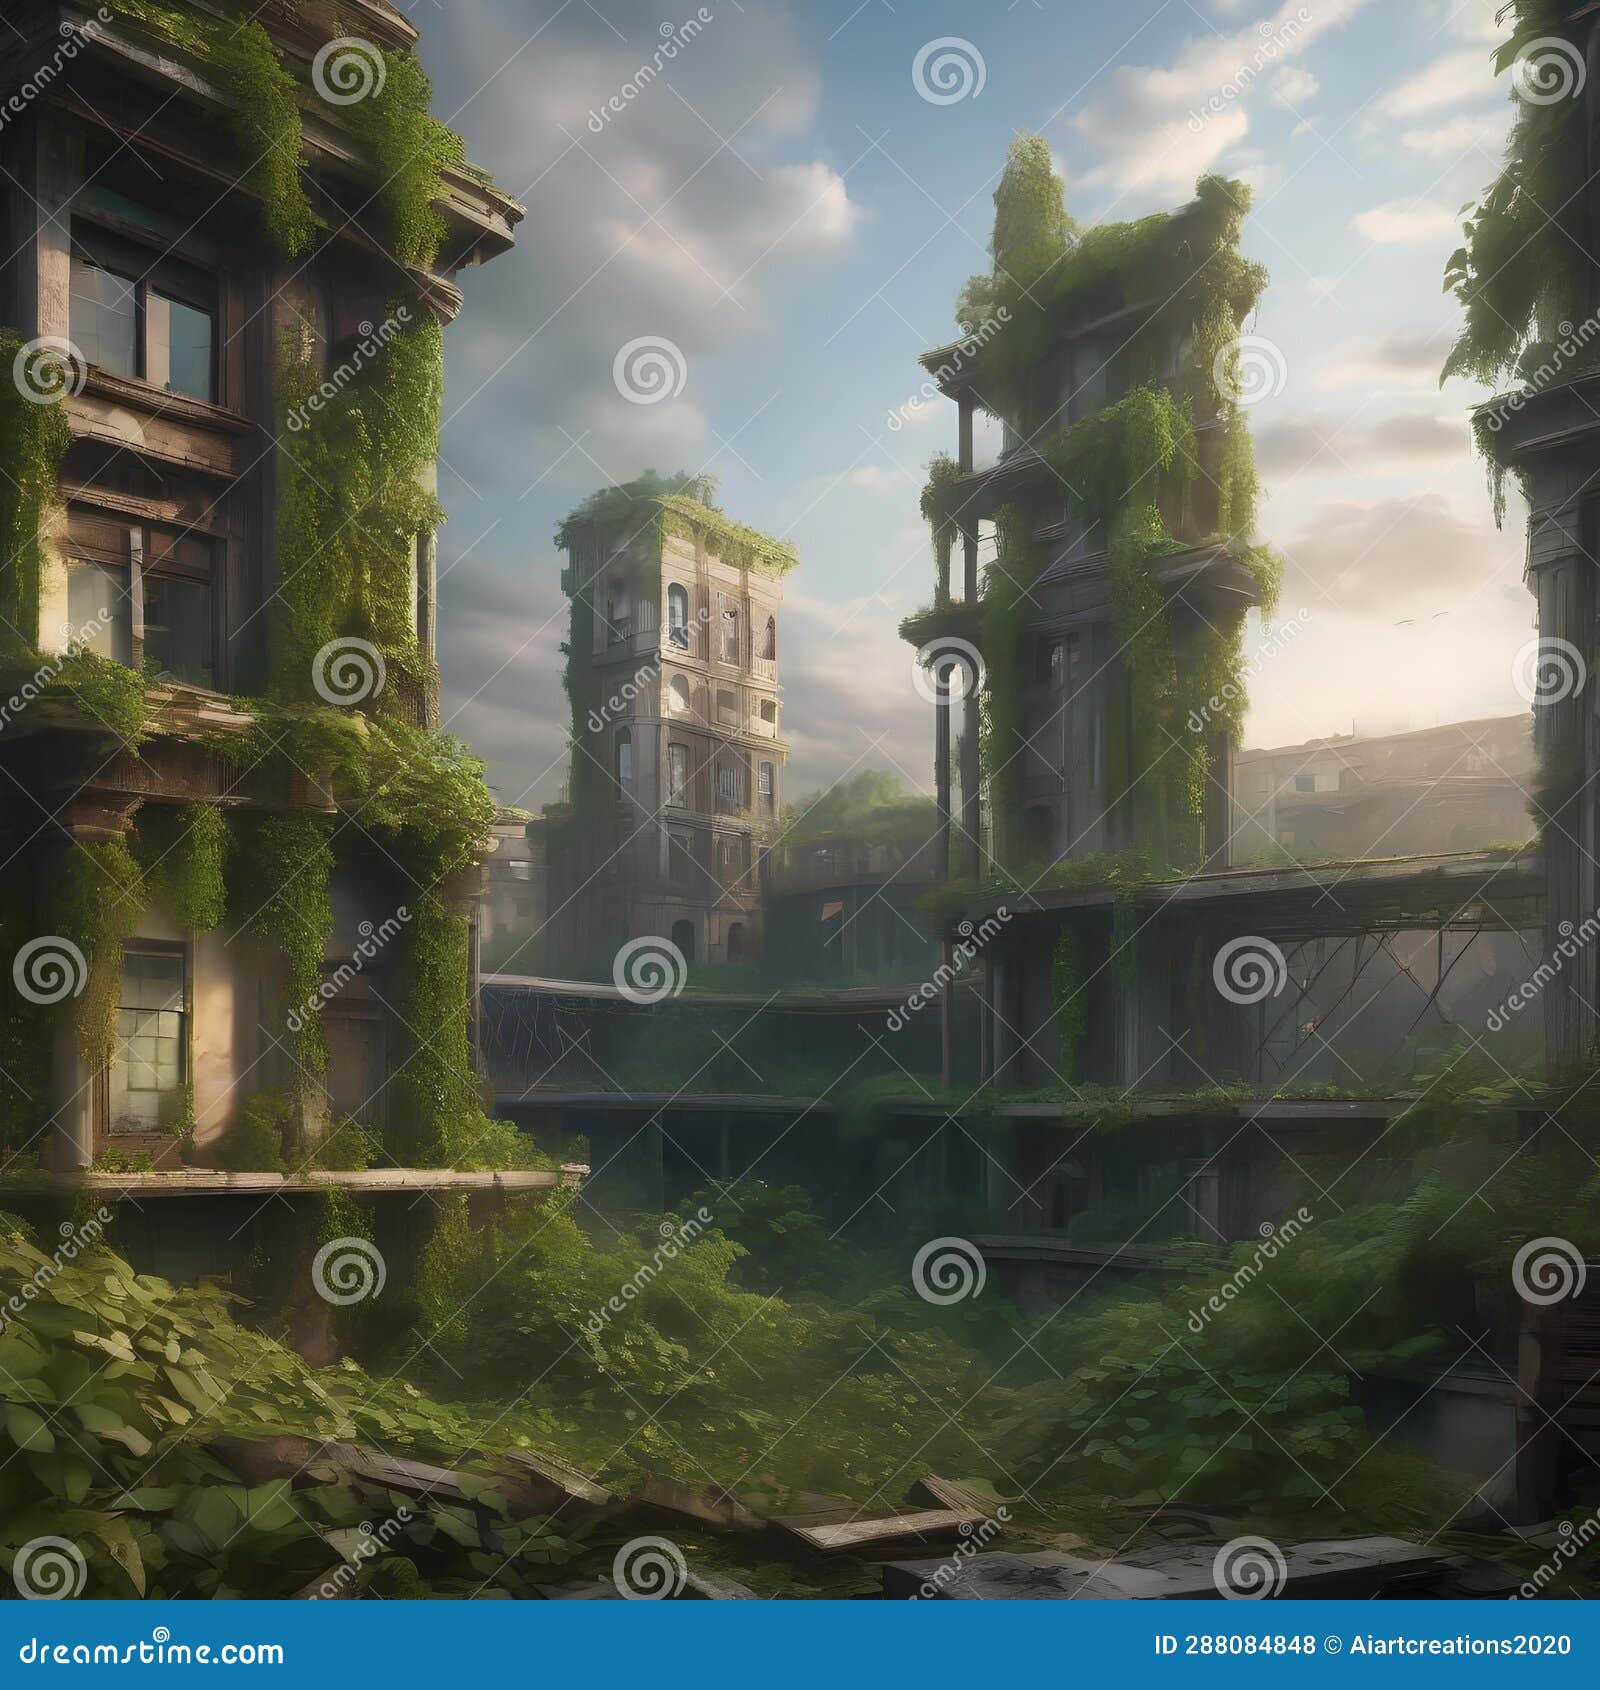 post-apocalyptic depiction of nature reclaiming a ruined metropolis, with vines and greenery everywhere1